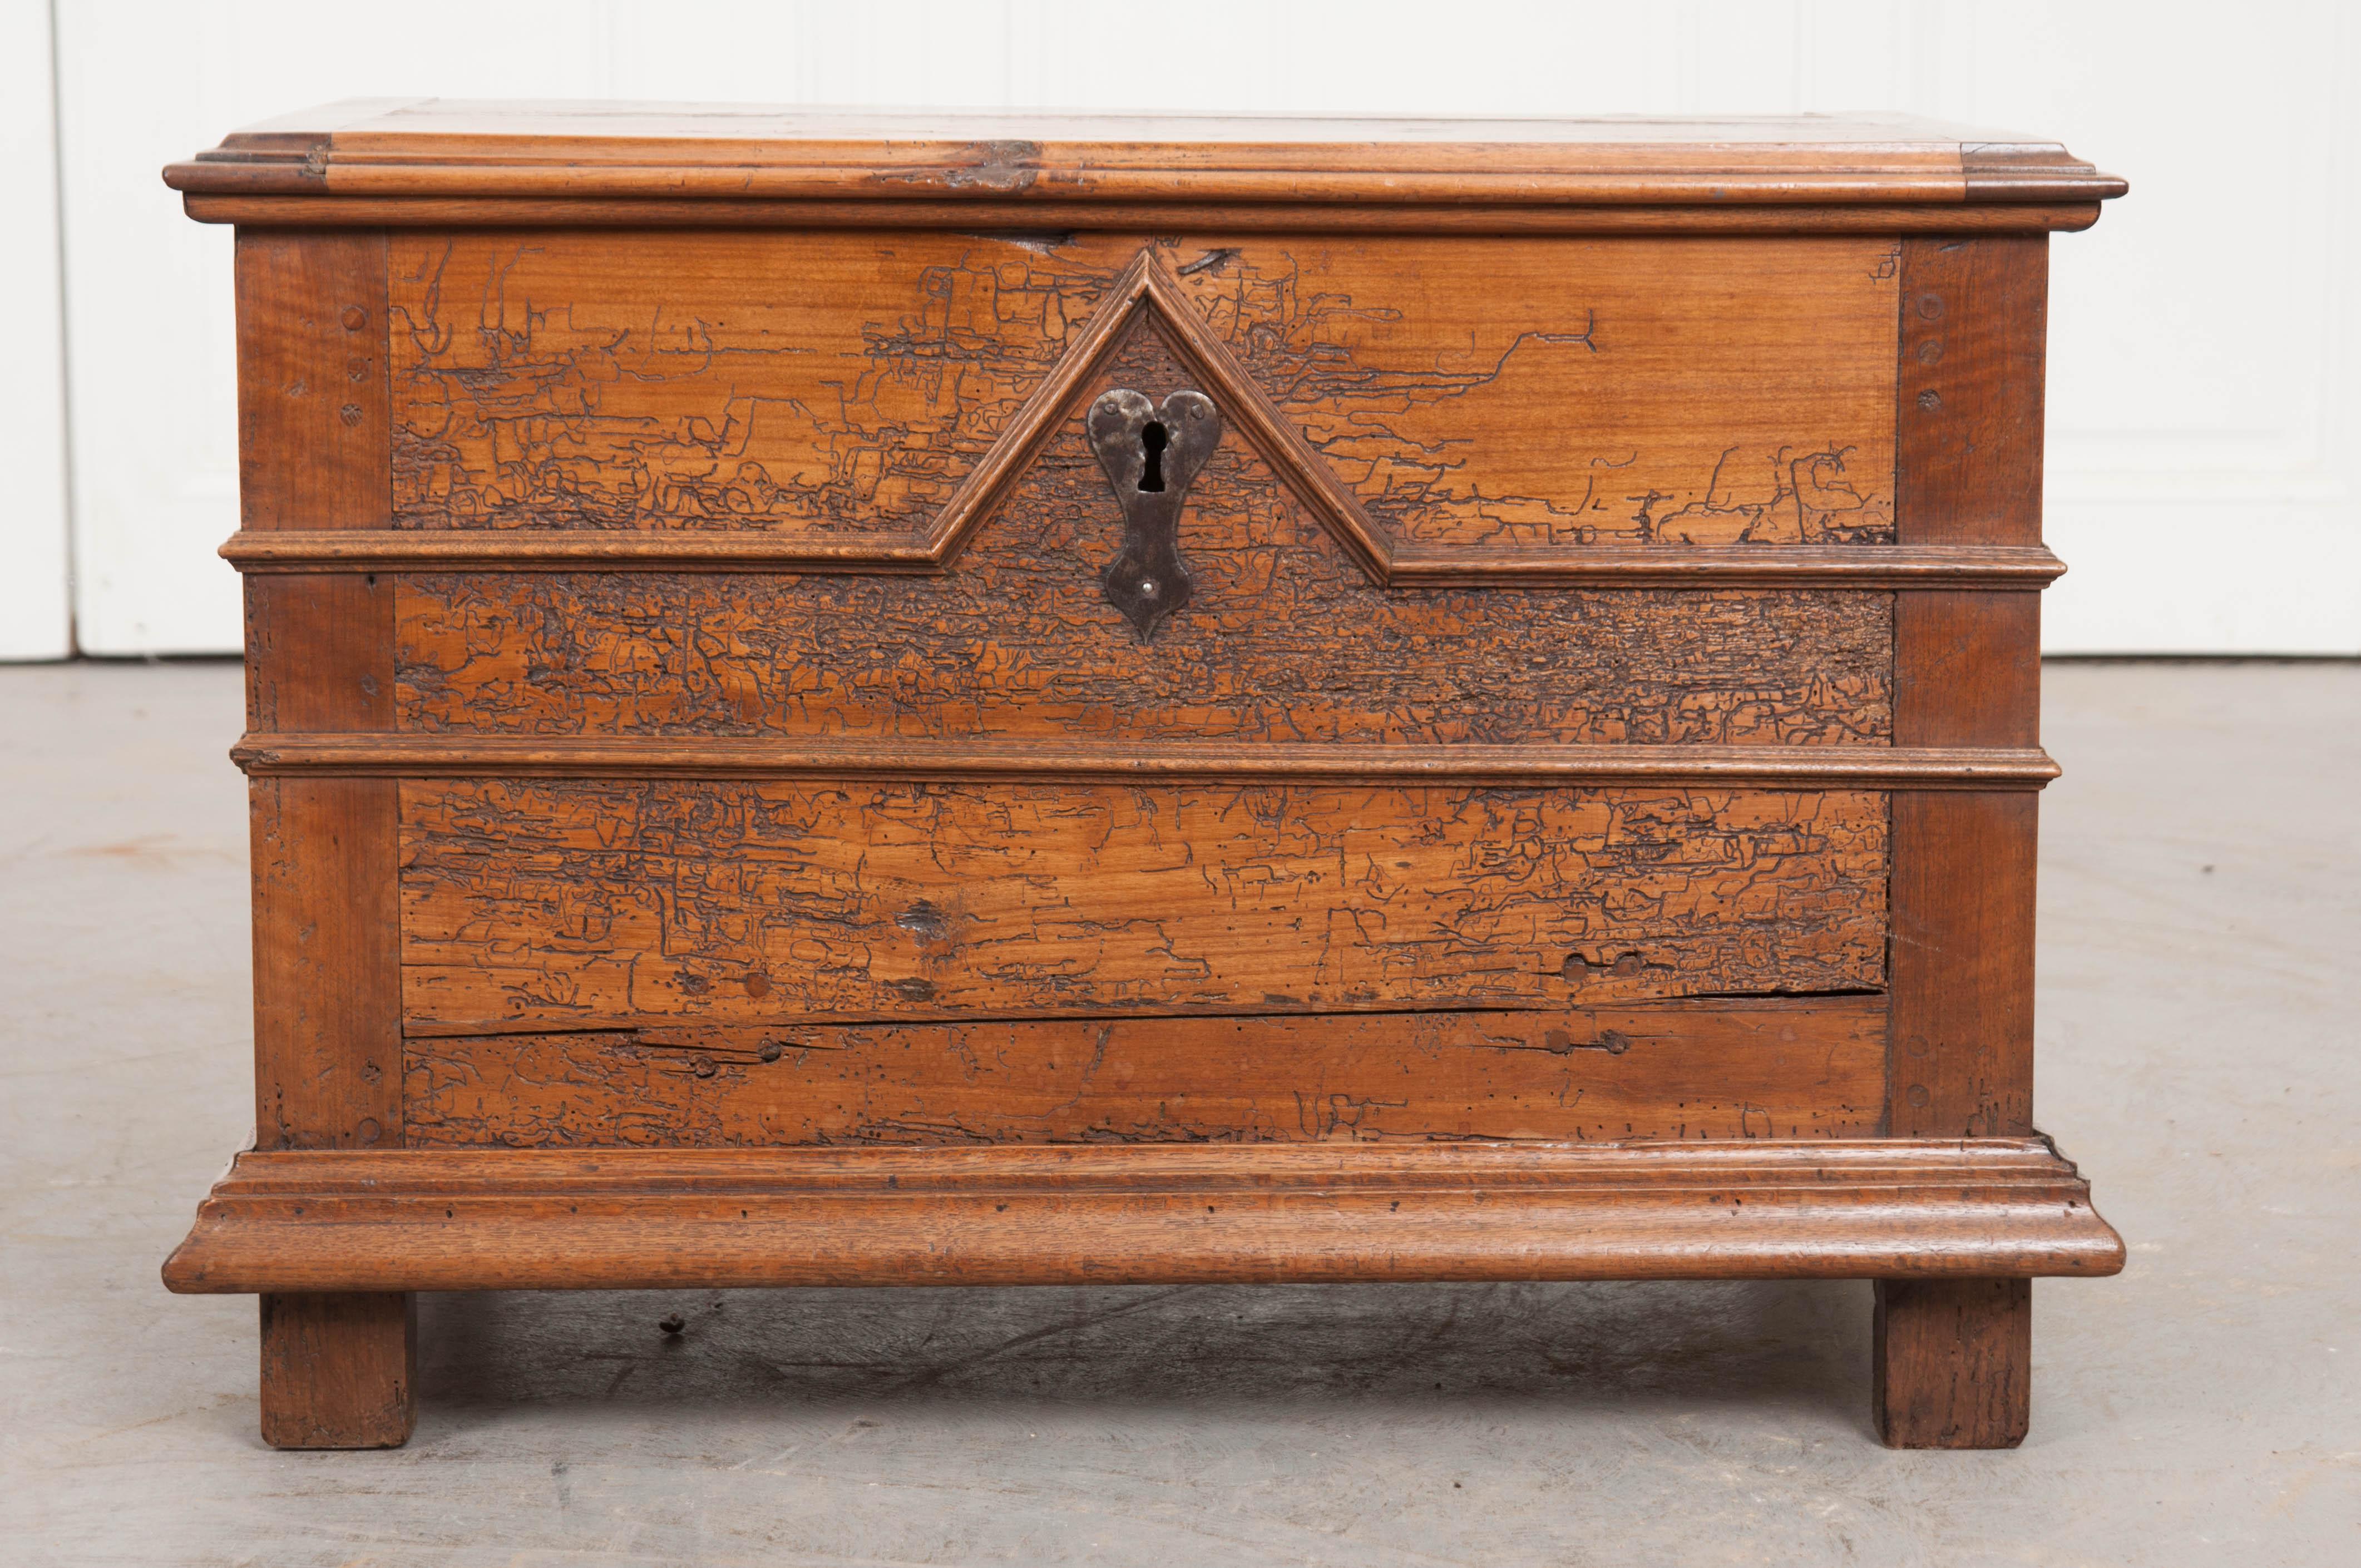 A smaller walnut trunk, made with transitional styling in France, circa 1780. This little chest combines stylings of English Jacobean and French Louis XIII furniture. The hinges and escutcheon are both made of hand forged iron that provide even more